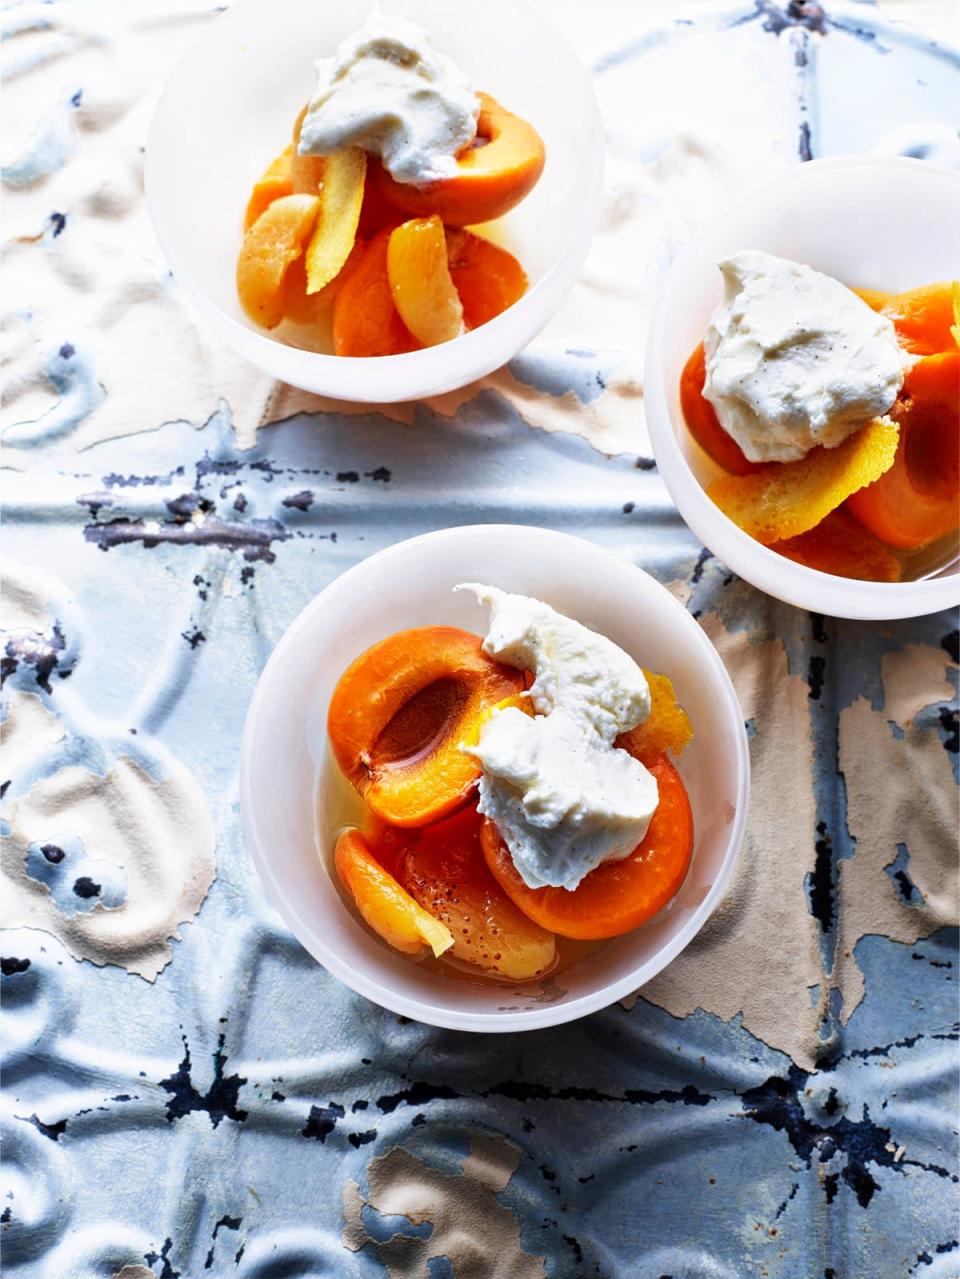 The textures of fresh and dried apricots work together in this dessert (Ben Tish)